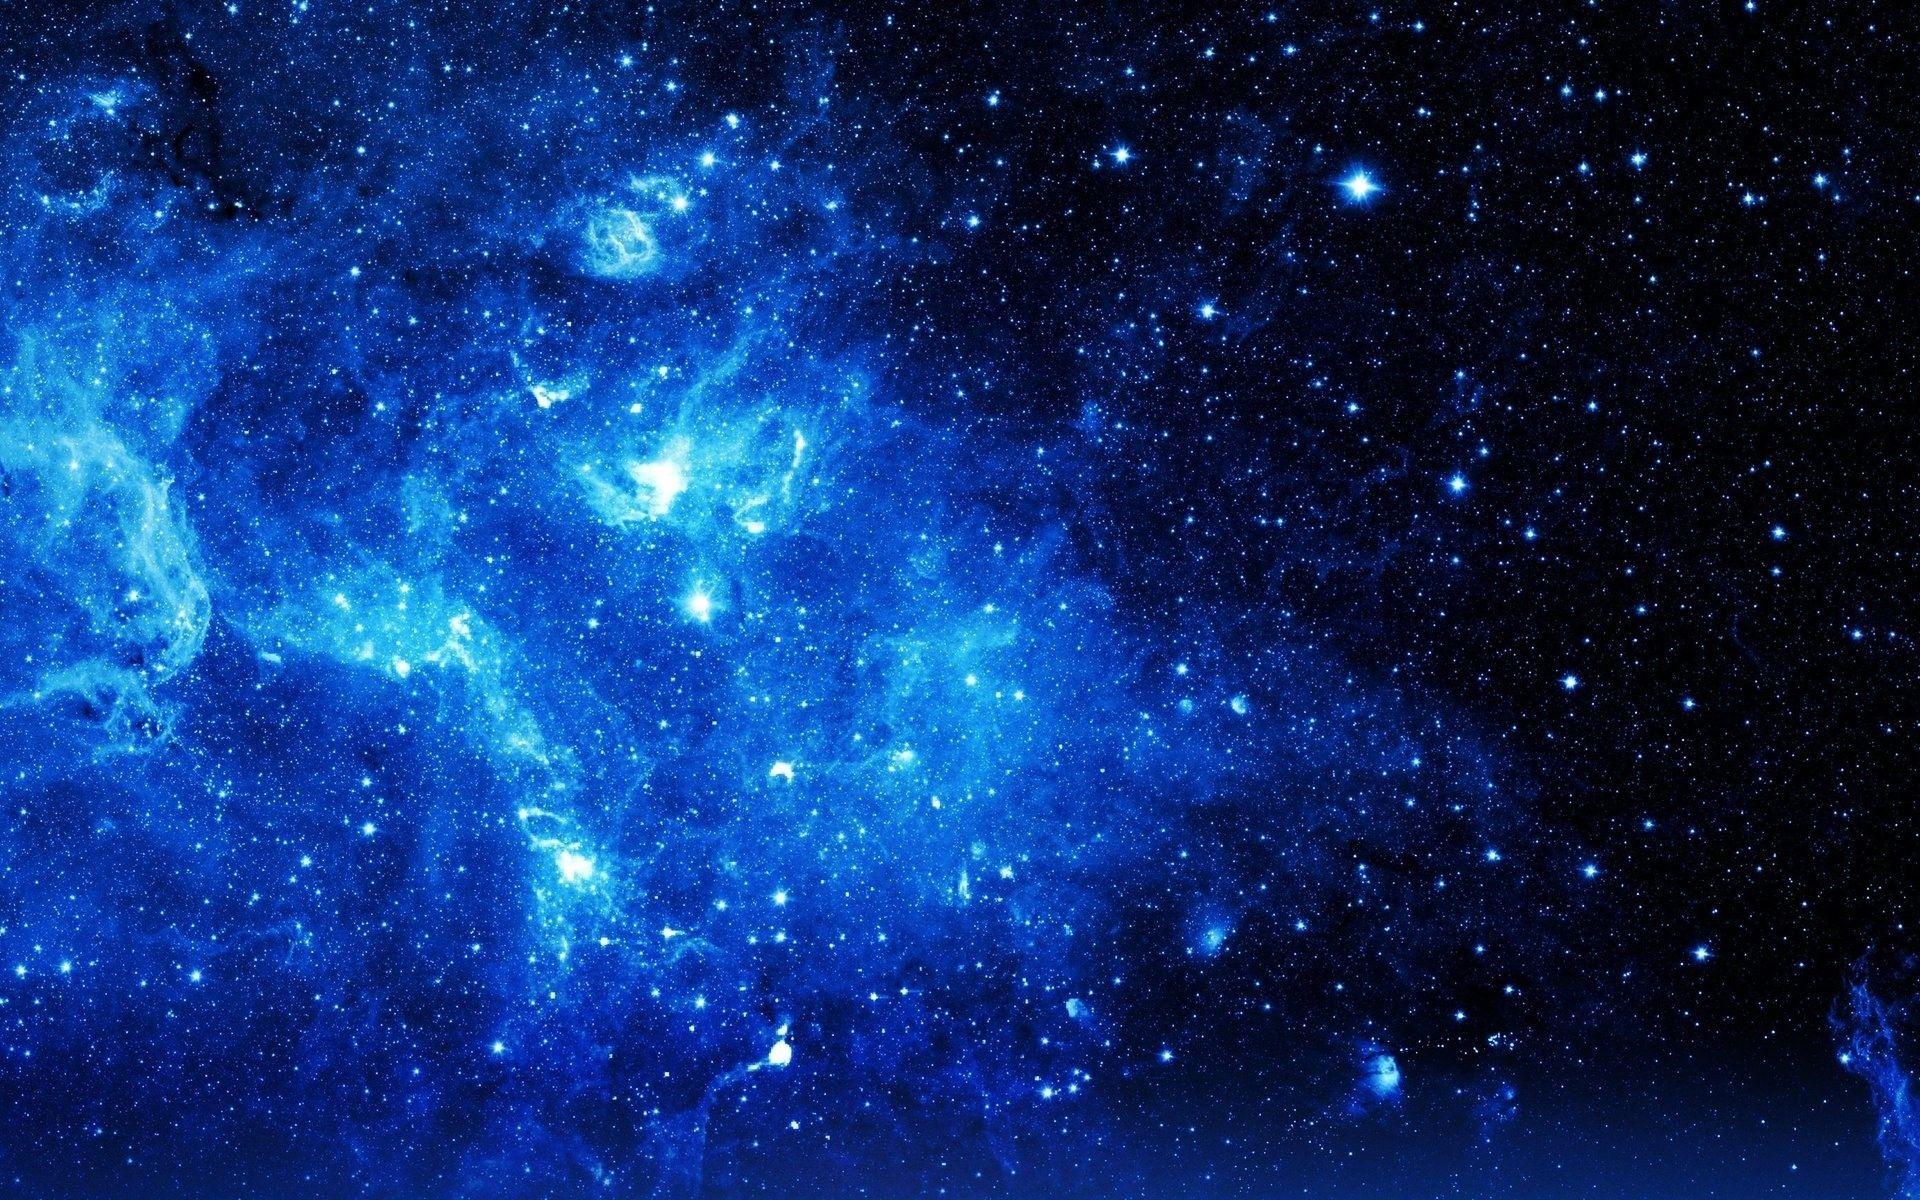 Blue Universe Space Wallpapers Top Free Blue Universe Space Backgrounds Wallpaperaccess 1080x1920 space stars galaxy android wallpaper free download. blue universe space wallpapers top